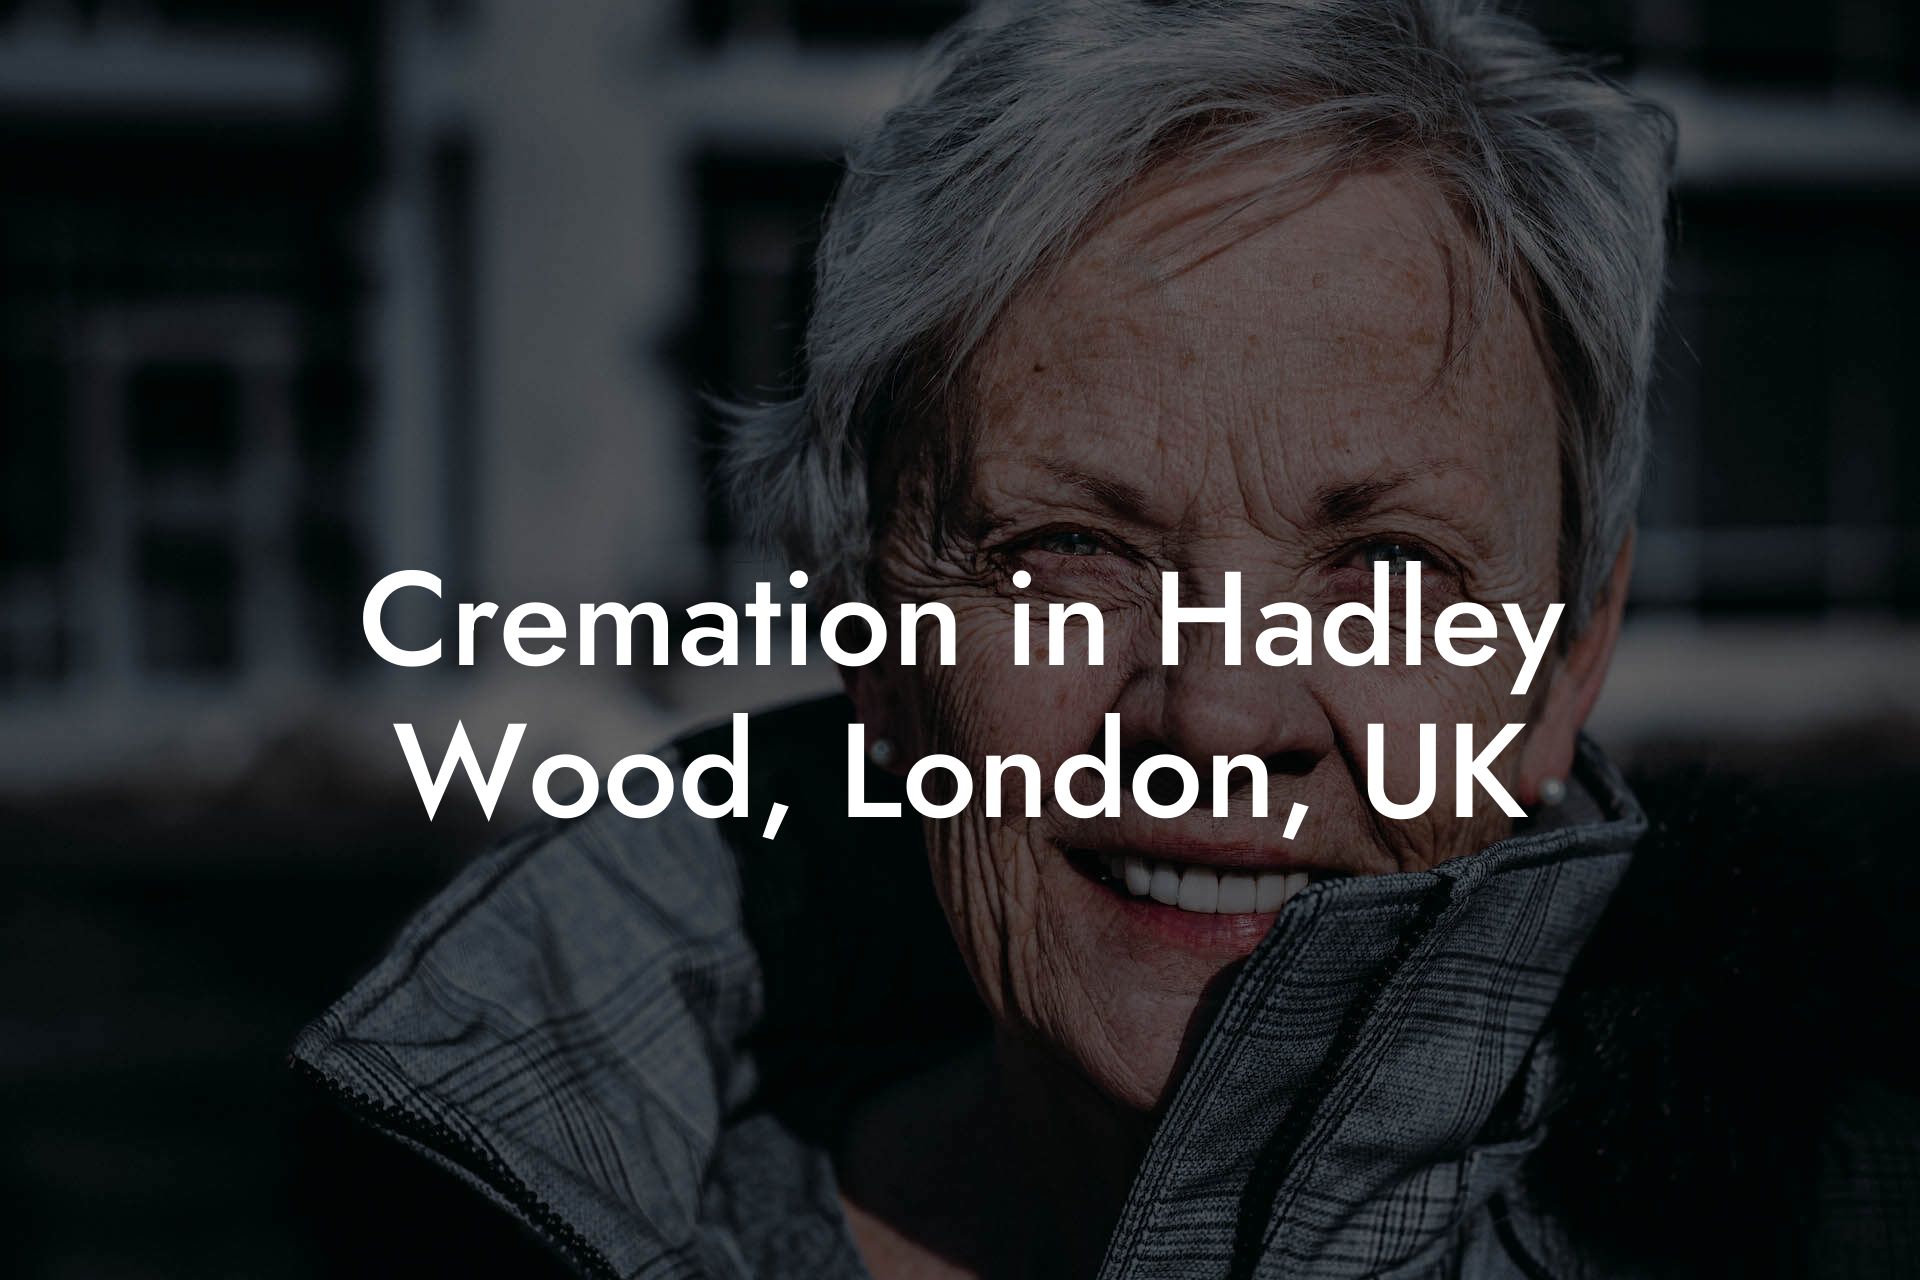 Cremation in Hadley Wood, London, UK